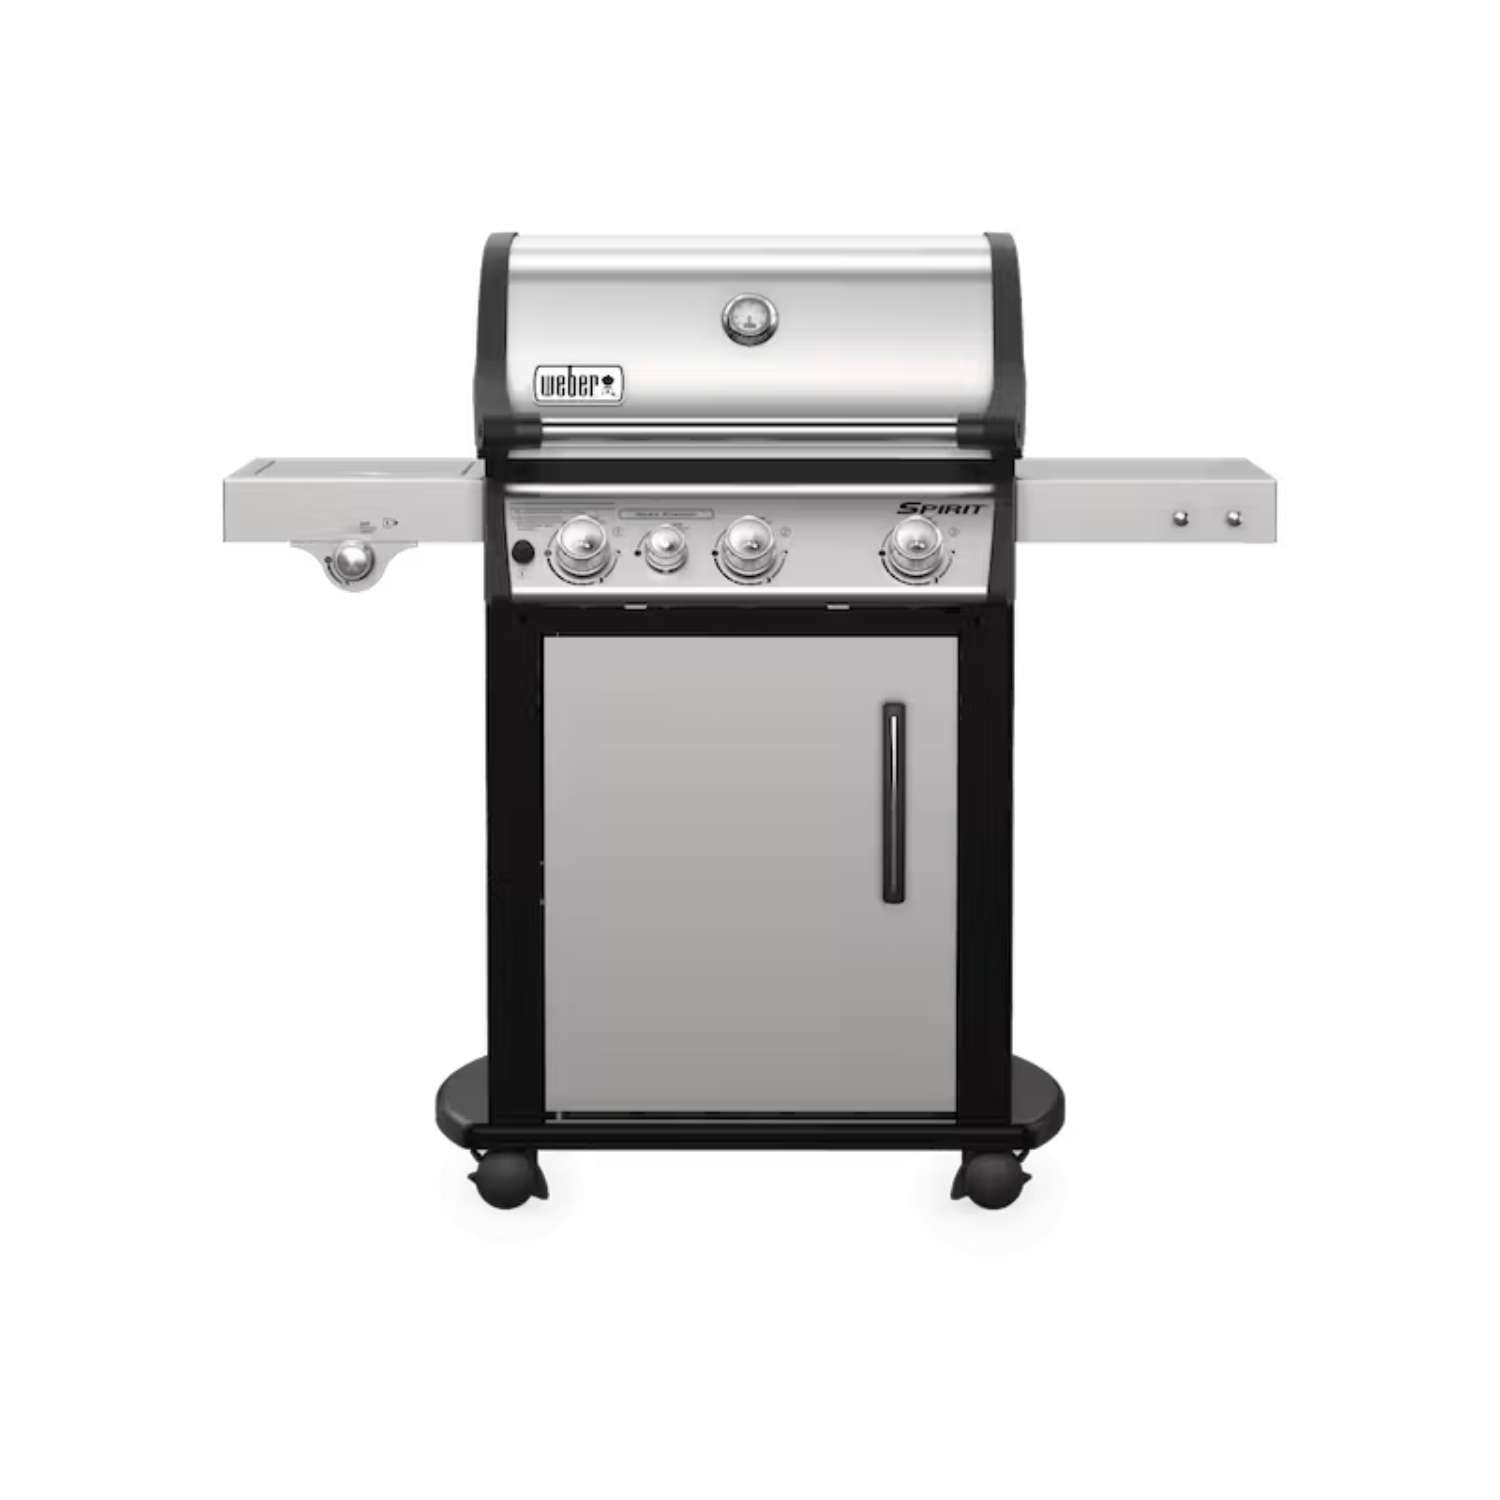 Weber Spirit SP-335 Grill perfect for outdoor barbecues available at MeatKing.hk5